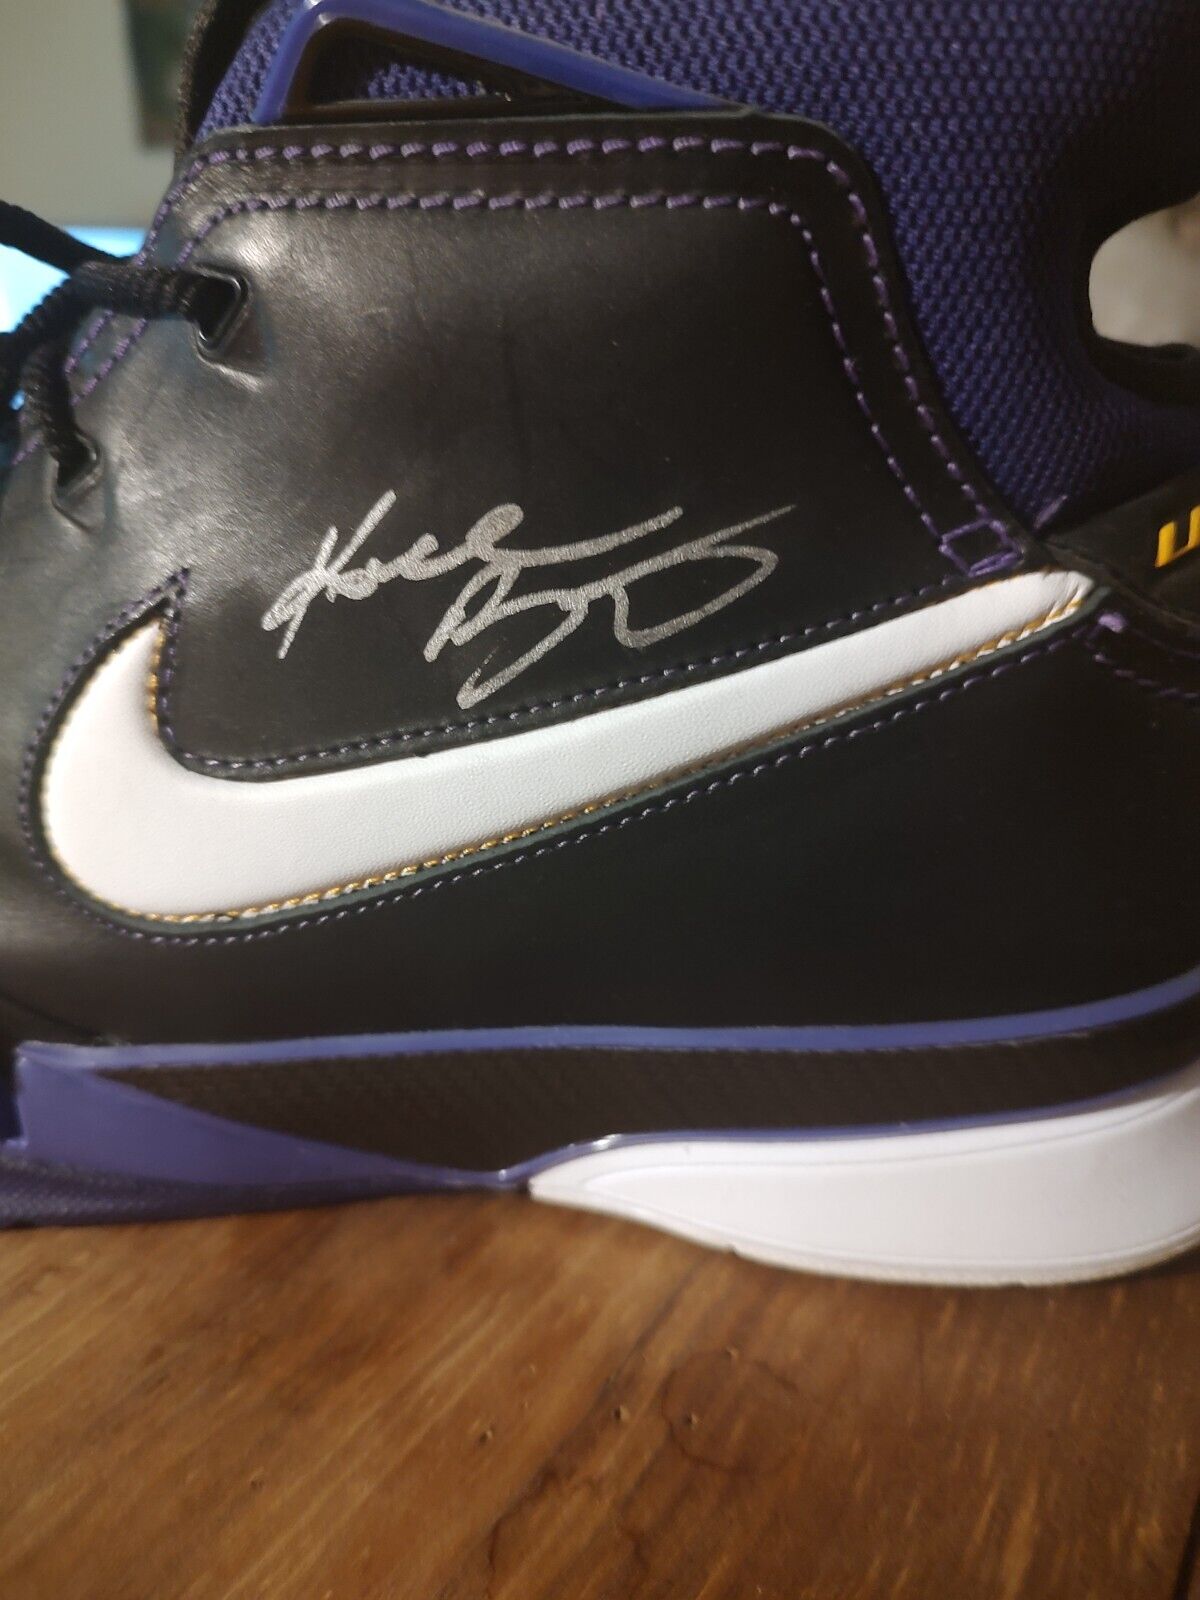 Kobe Bryant autographed Nike Air Zoom Up Tempo size 13 Shoe. Game worn.   